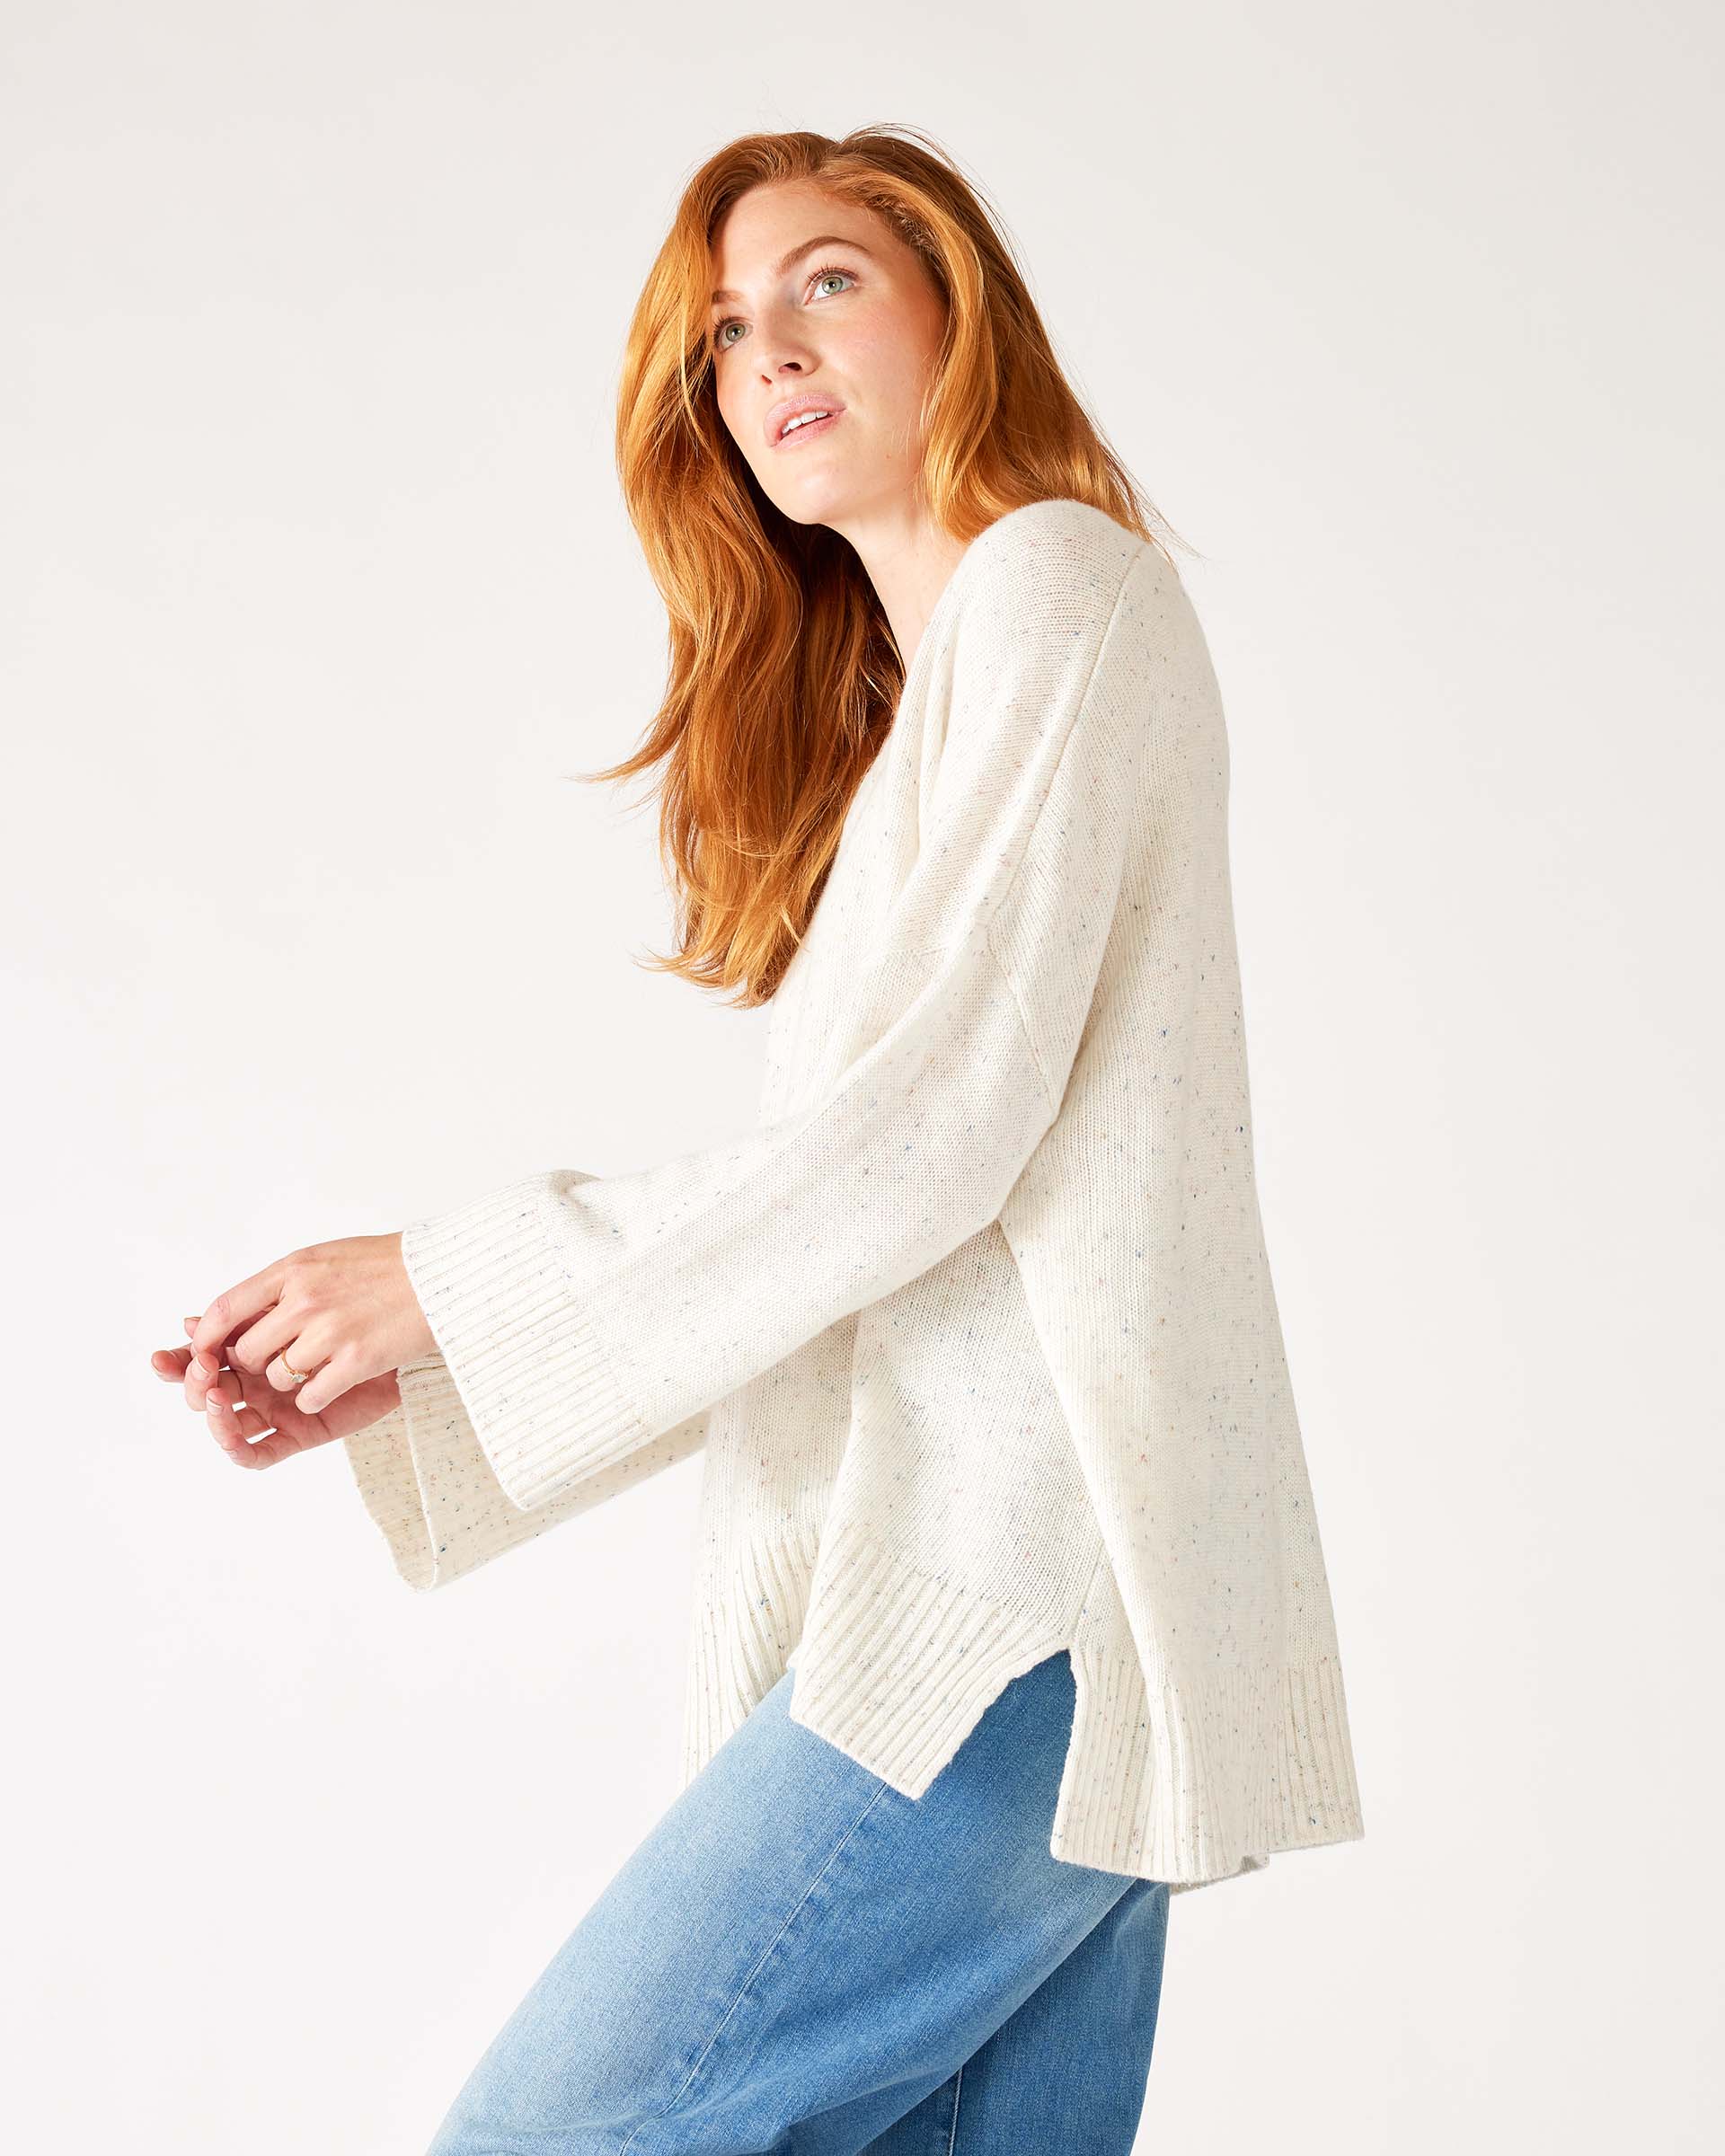 profile of woman wearing mersea montauk v-neck sweater with wide sleeves in cream color